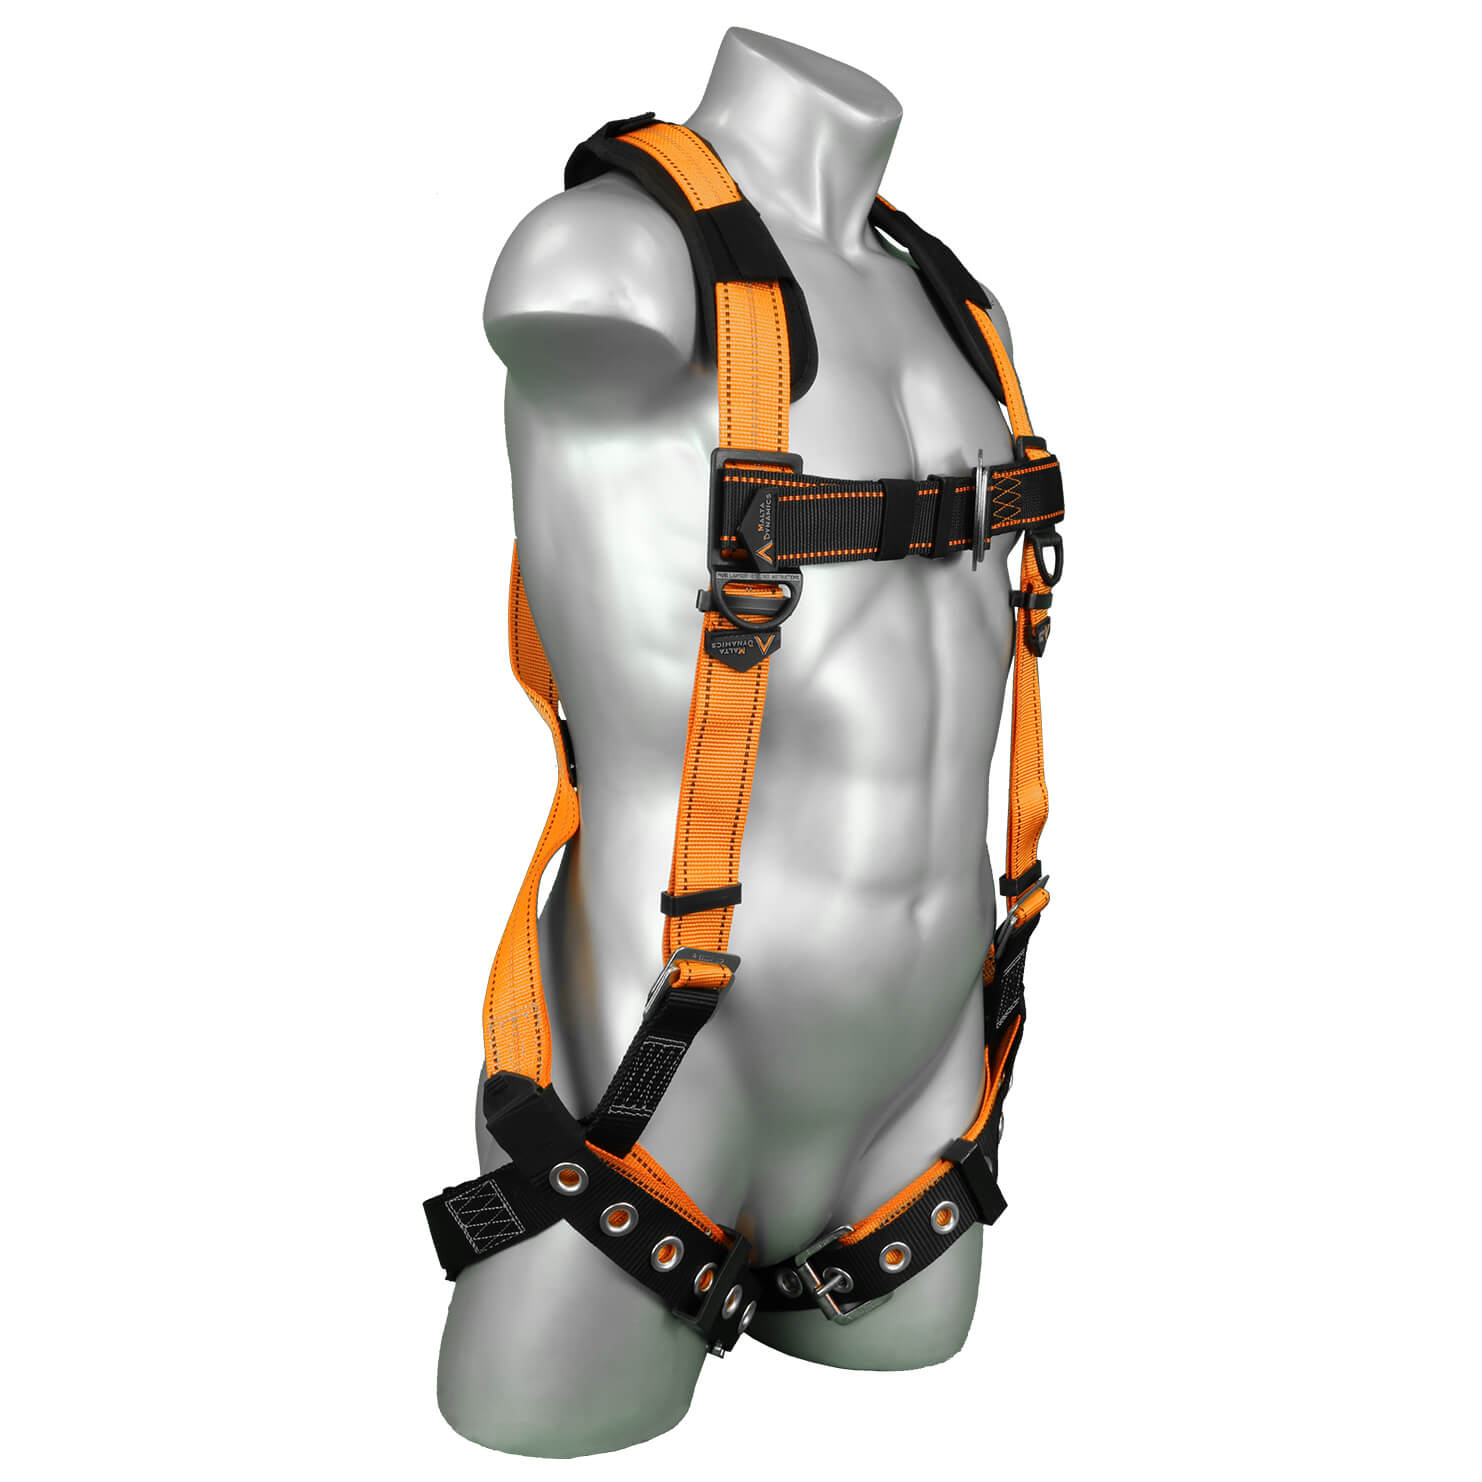 Guardian B7 Comfort Full-Body Harness w/ Waist Pad, Quick-Connect Chest,  Tongue-Buckle Legs, Side D-Rings